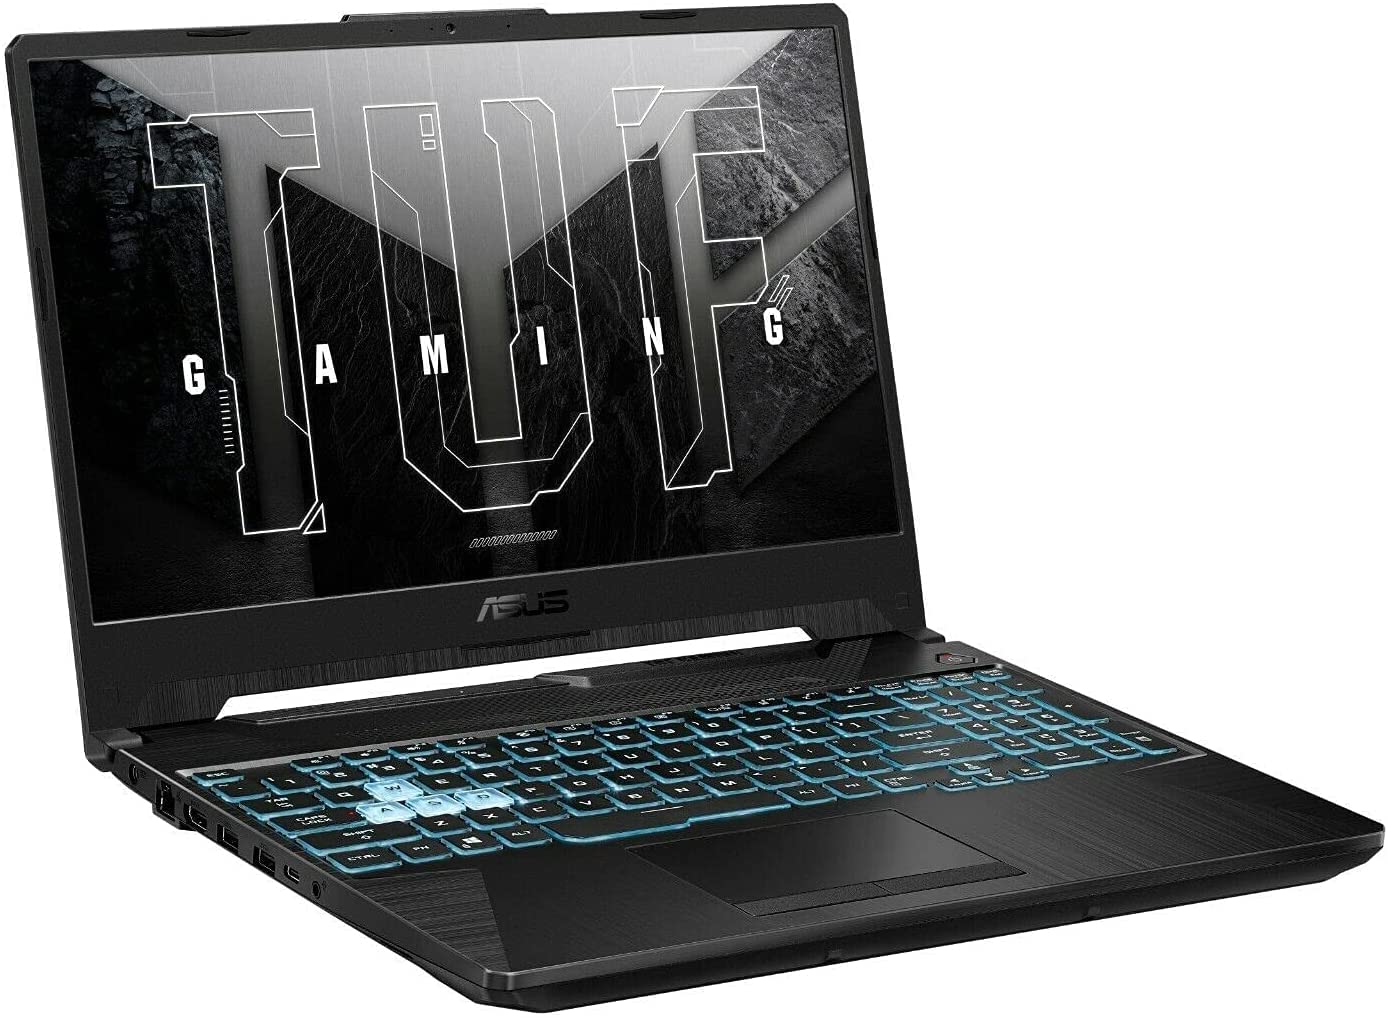 2021 Latest Asus TUF F15 Gaming Laptop 15 6 FHD 144Hz Display Core i5 11260H Upto 4 4GHz 8GB 512GB SSD NVIDIA r RTX 3050 4GB Graphics RGB Backilit Eng Key WIN10 Eclipse Gray - DealYaSteal